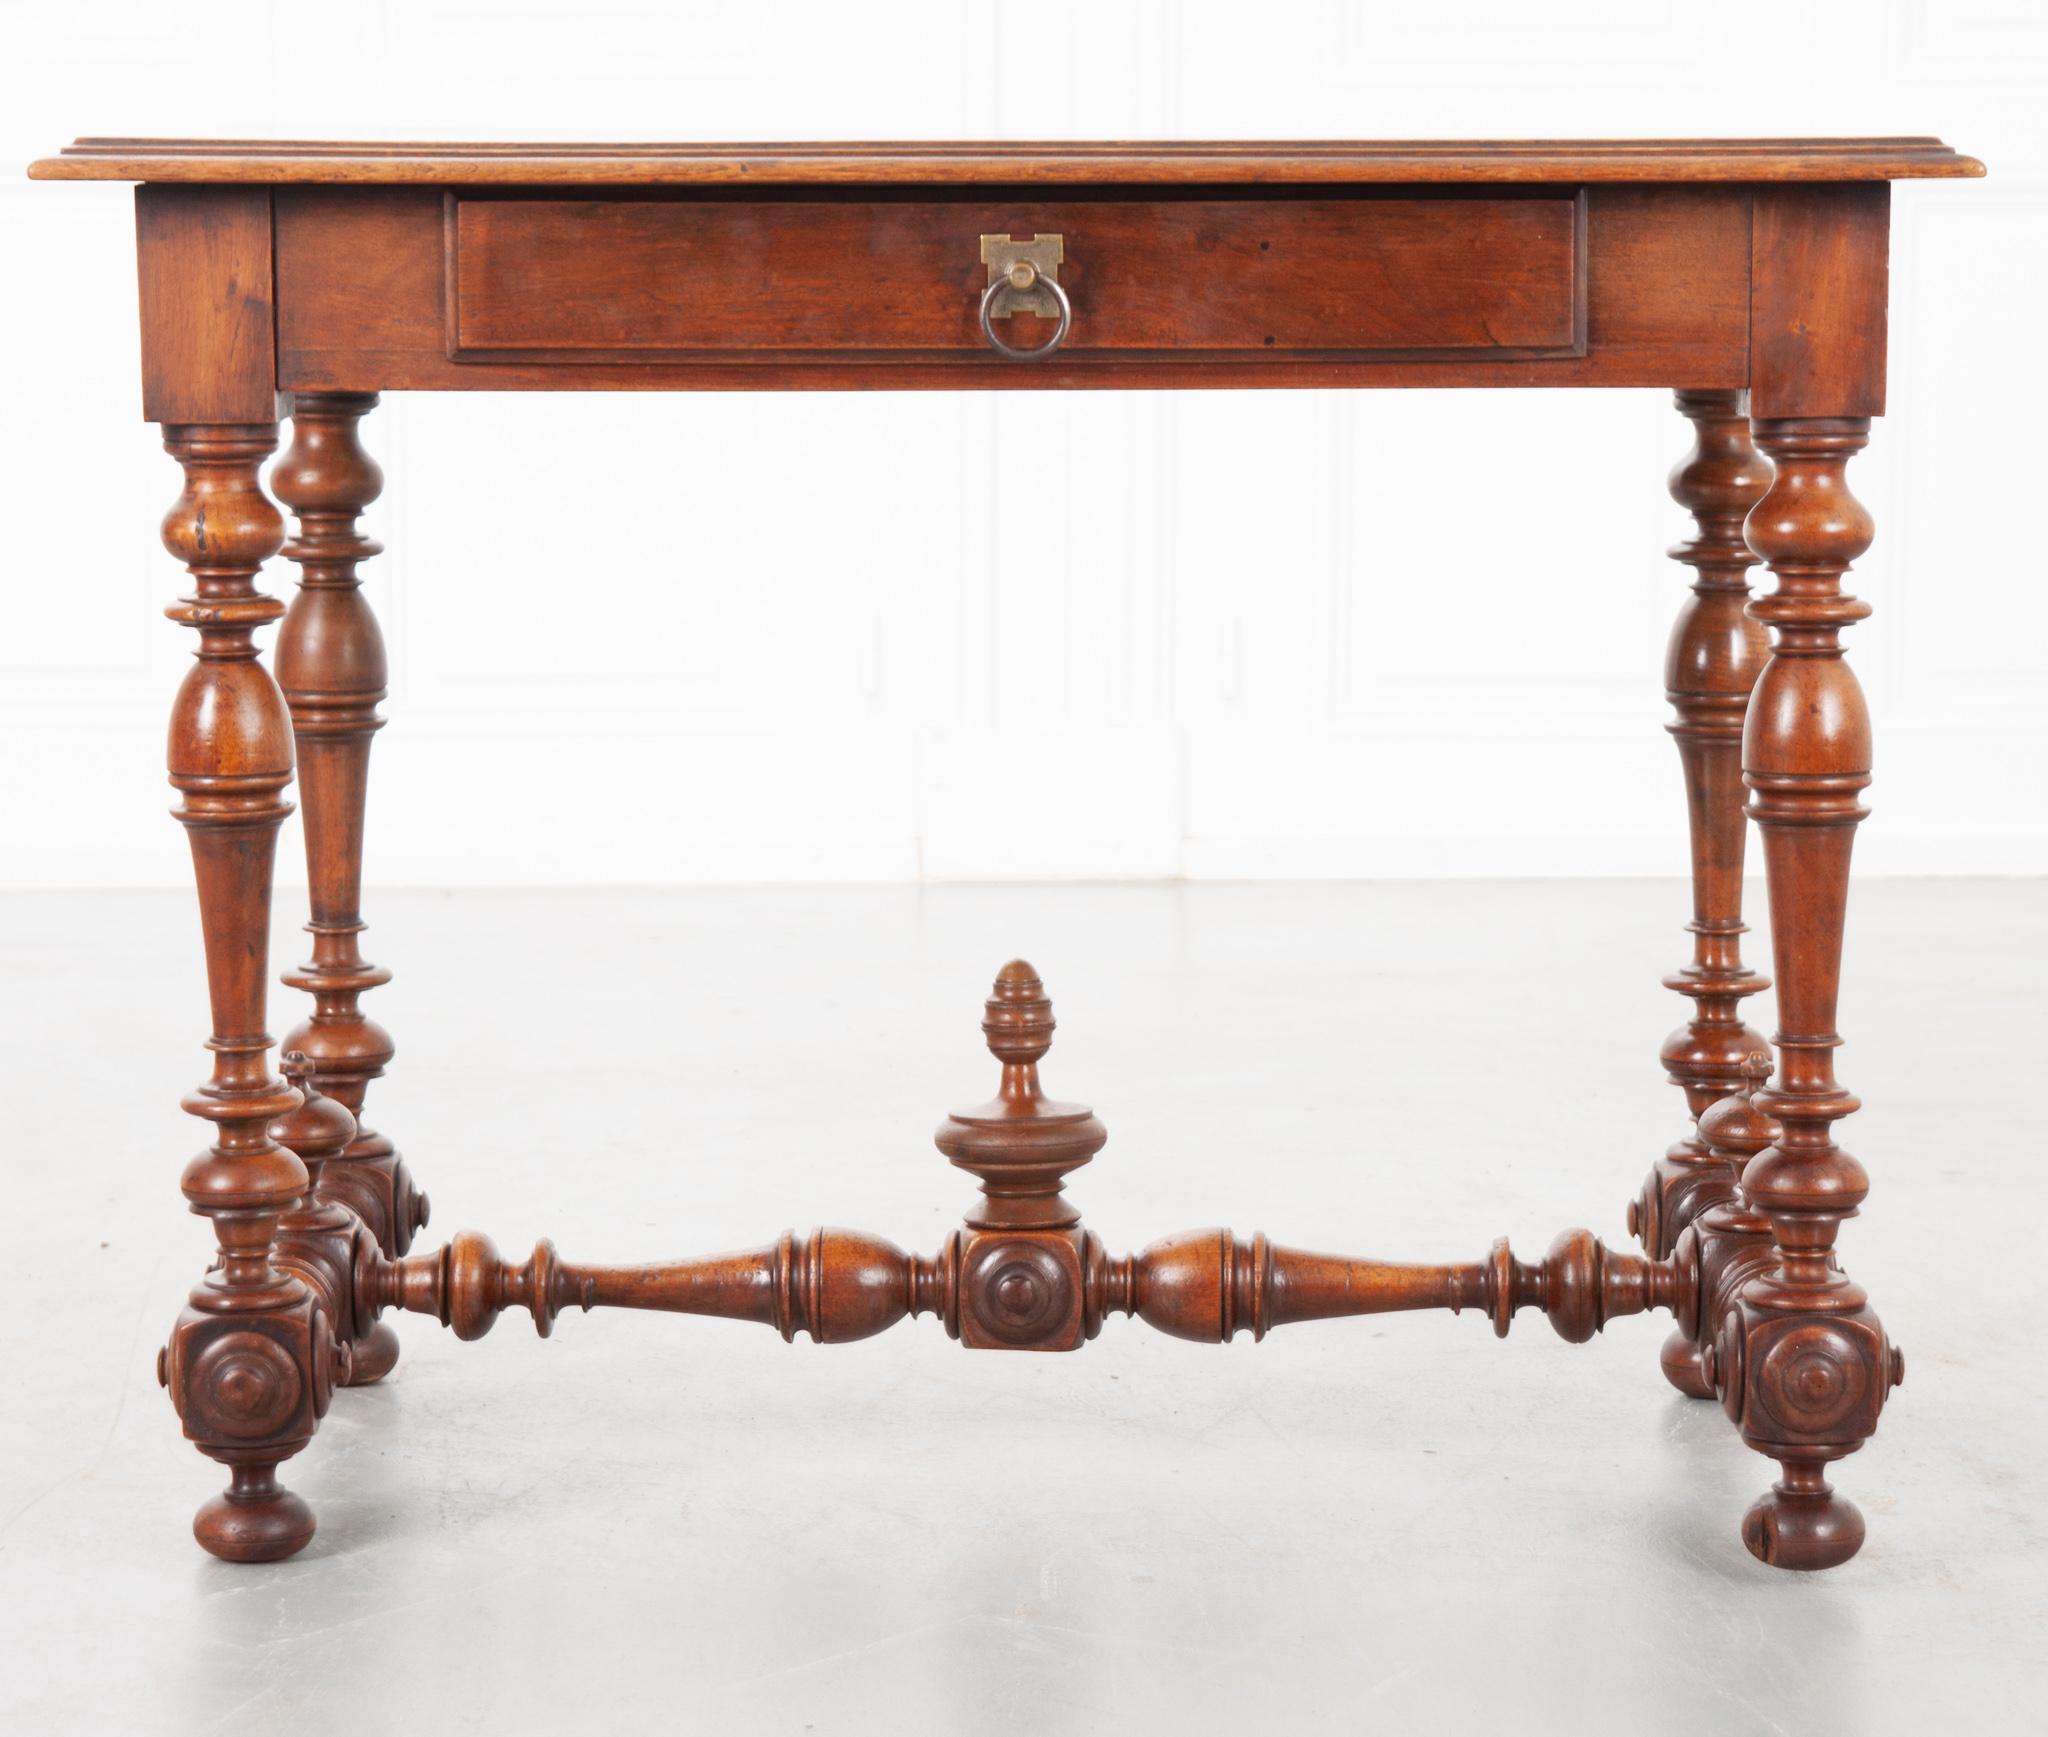 This is a good looking French 19th century oak and walnut writing table. The table’s apron has a single drawer opened by a worn brass pull. It has four turned legs and stretchers across the center and sides with three finials across them. Our table